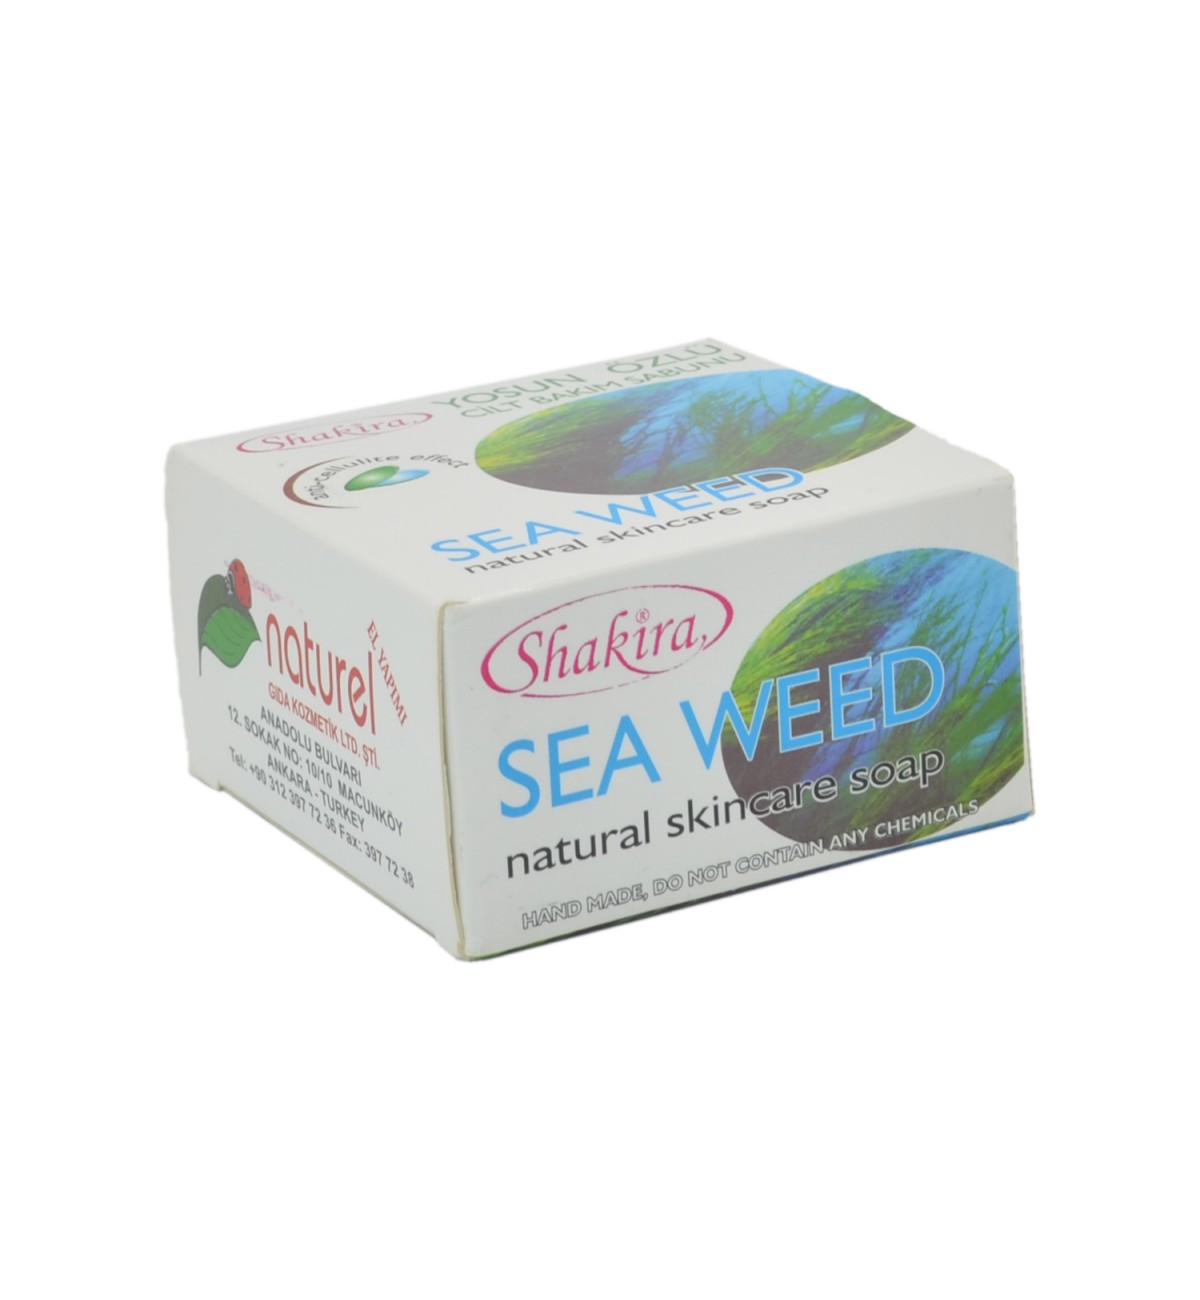 Seaweed Extract Skin Care Soap & Anti-cellulite Effective